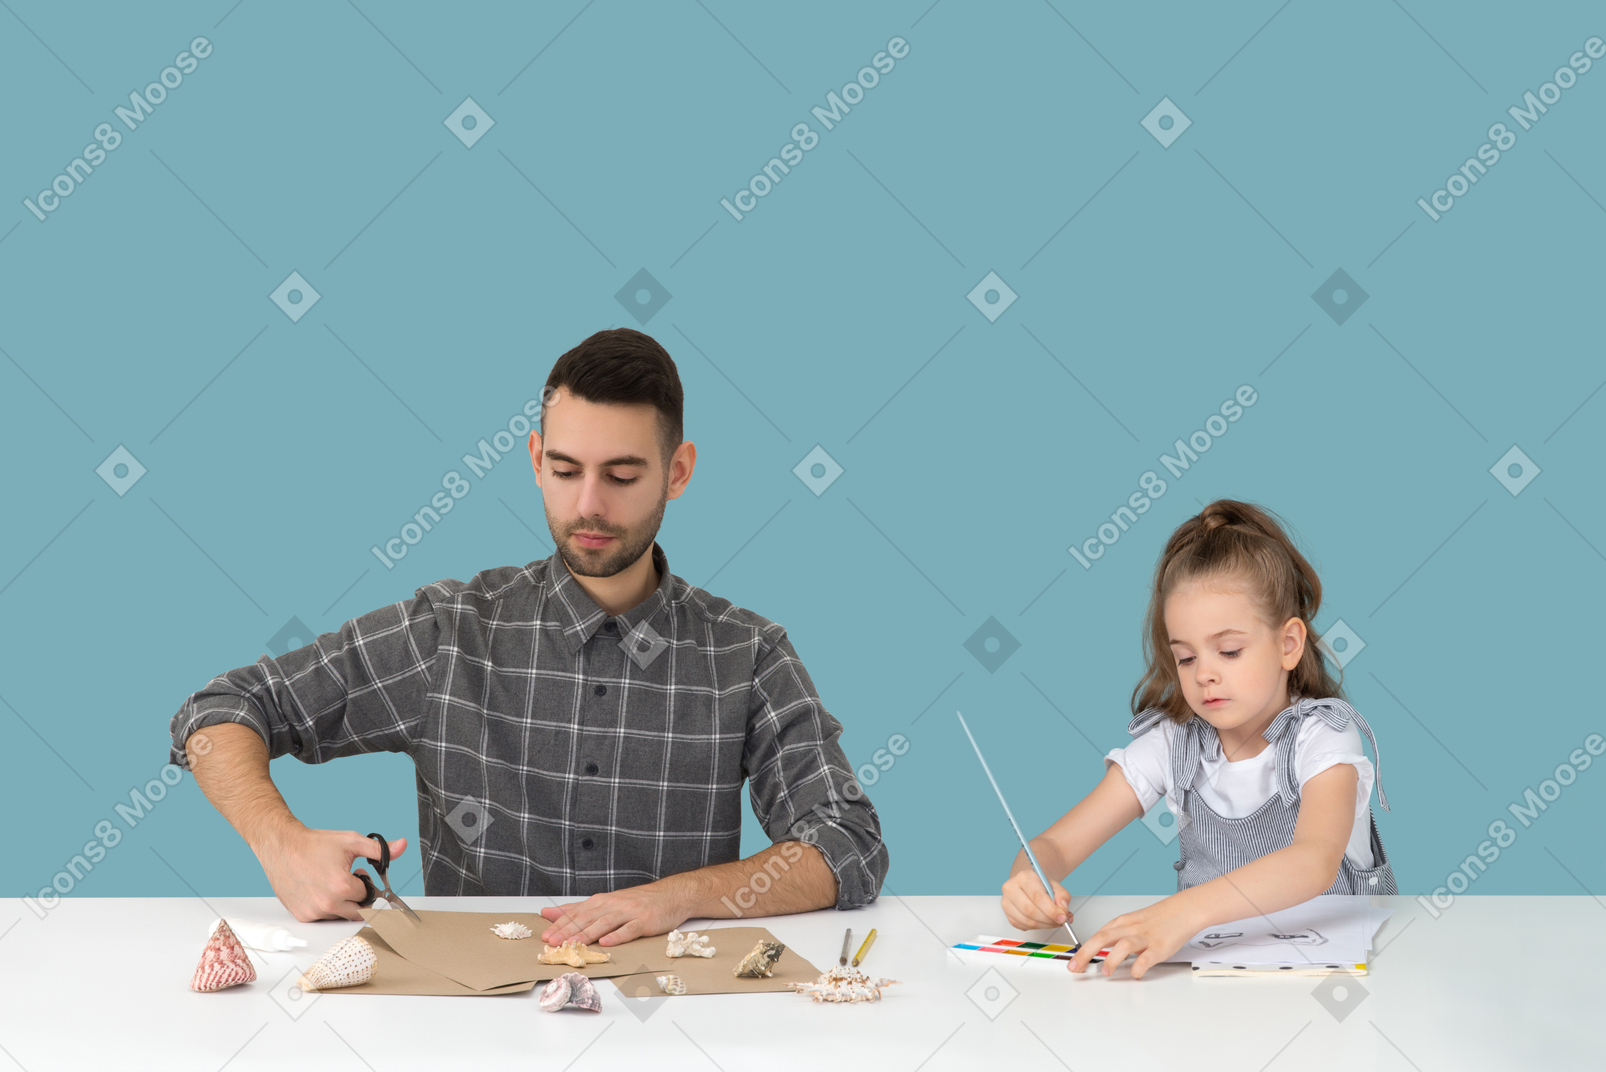 Dad and daughter spending time together and doing some craft